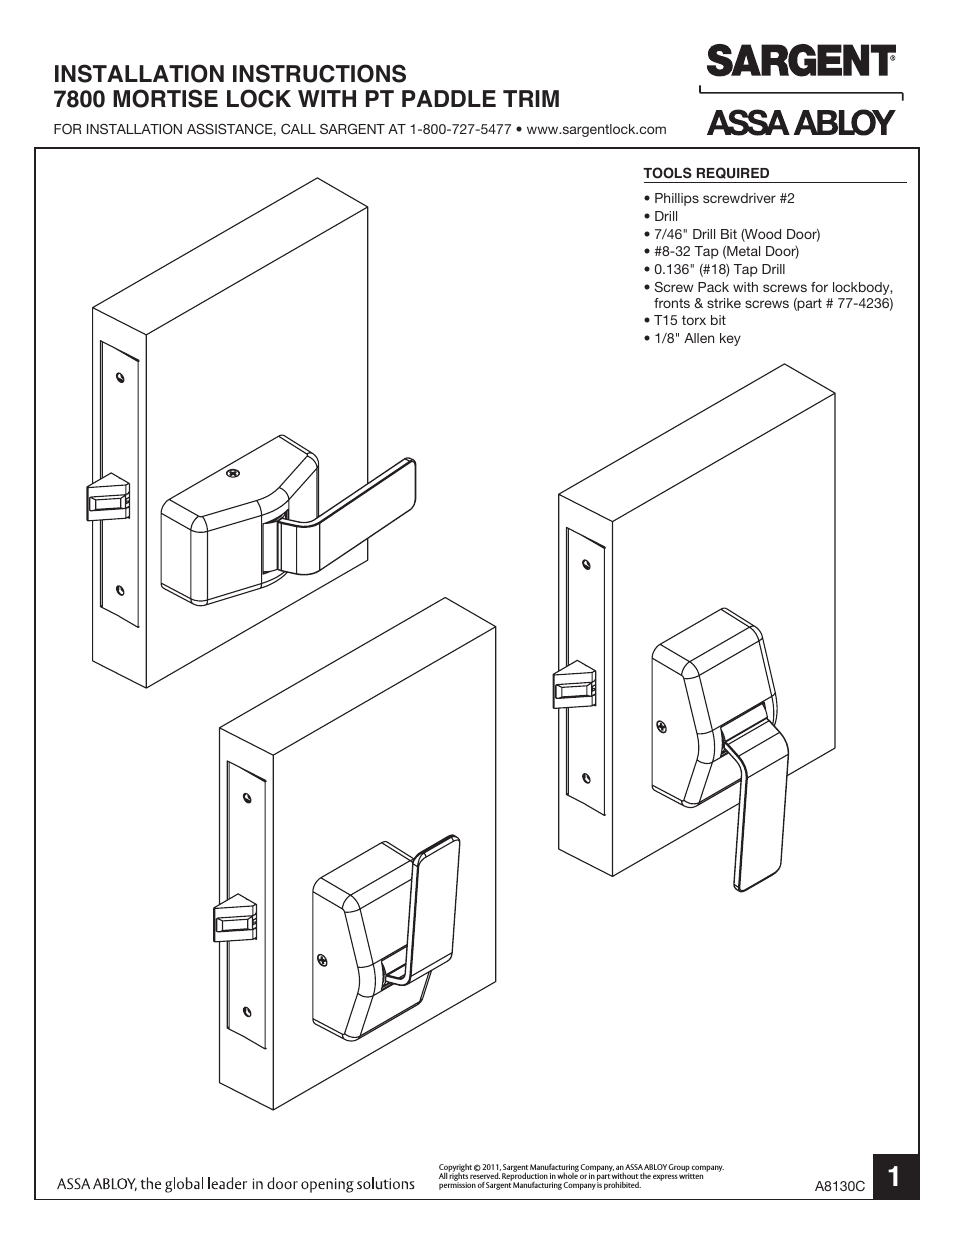 7800 Mortise Lock with Push/Pull Trim (PT)